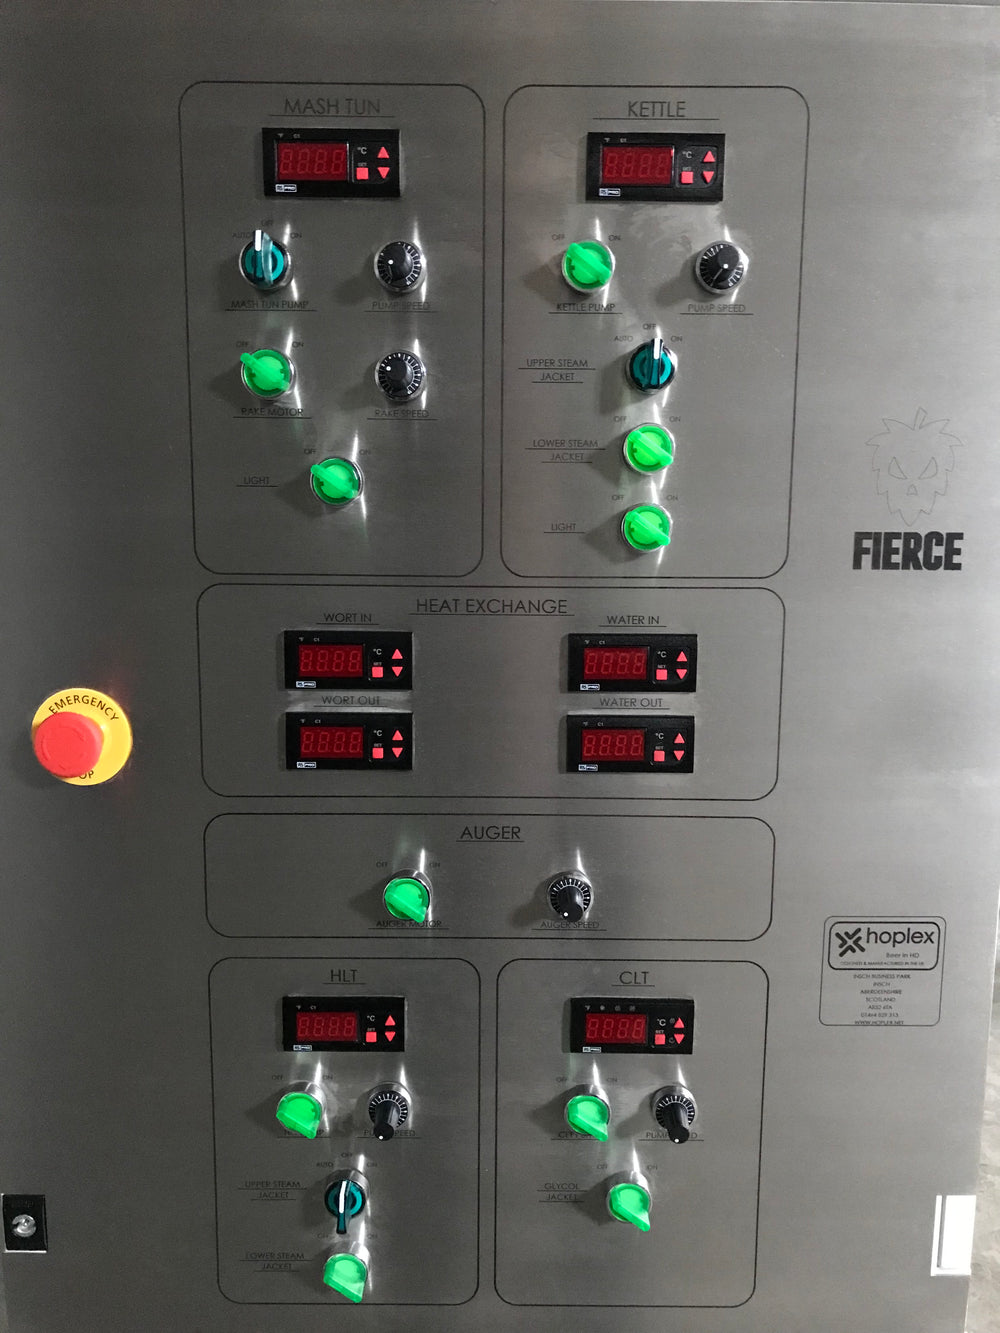 Control Panel - Brewhouse